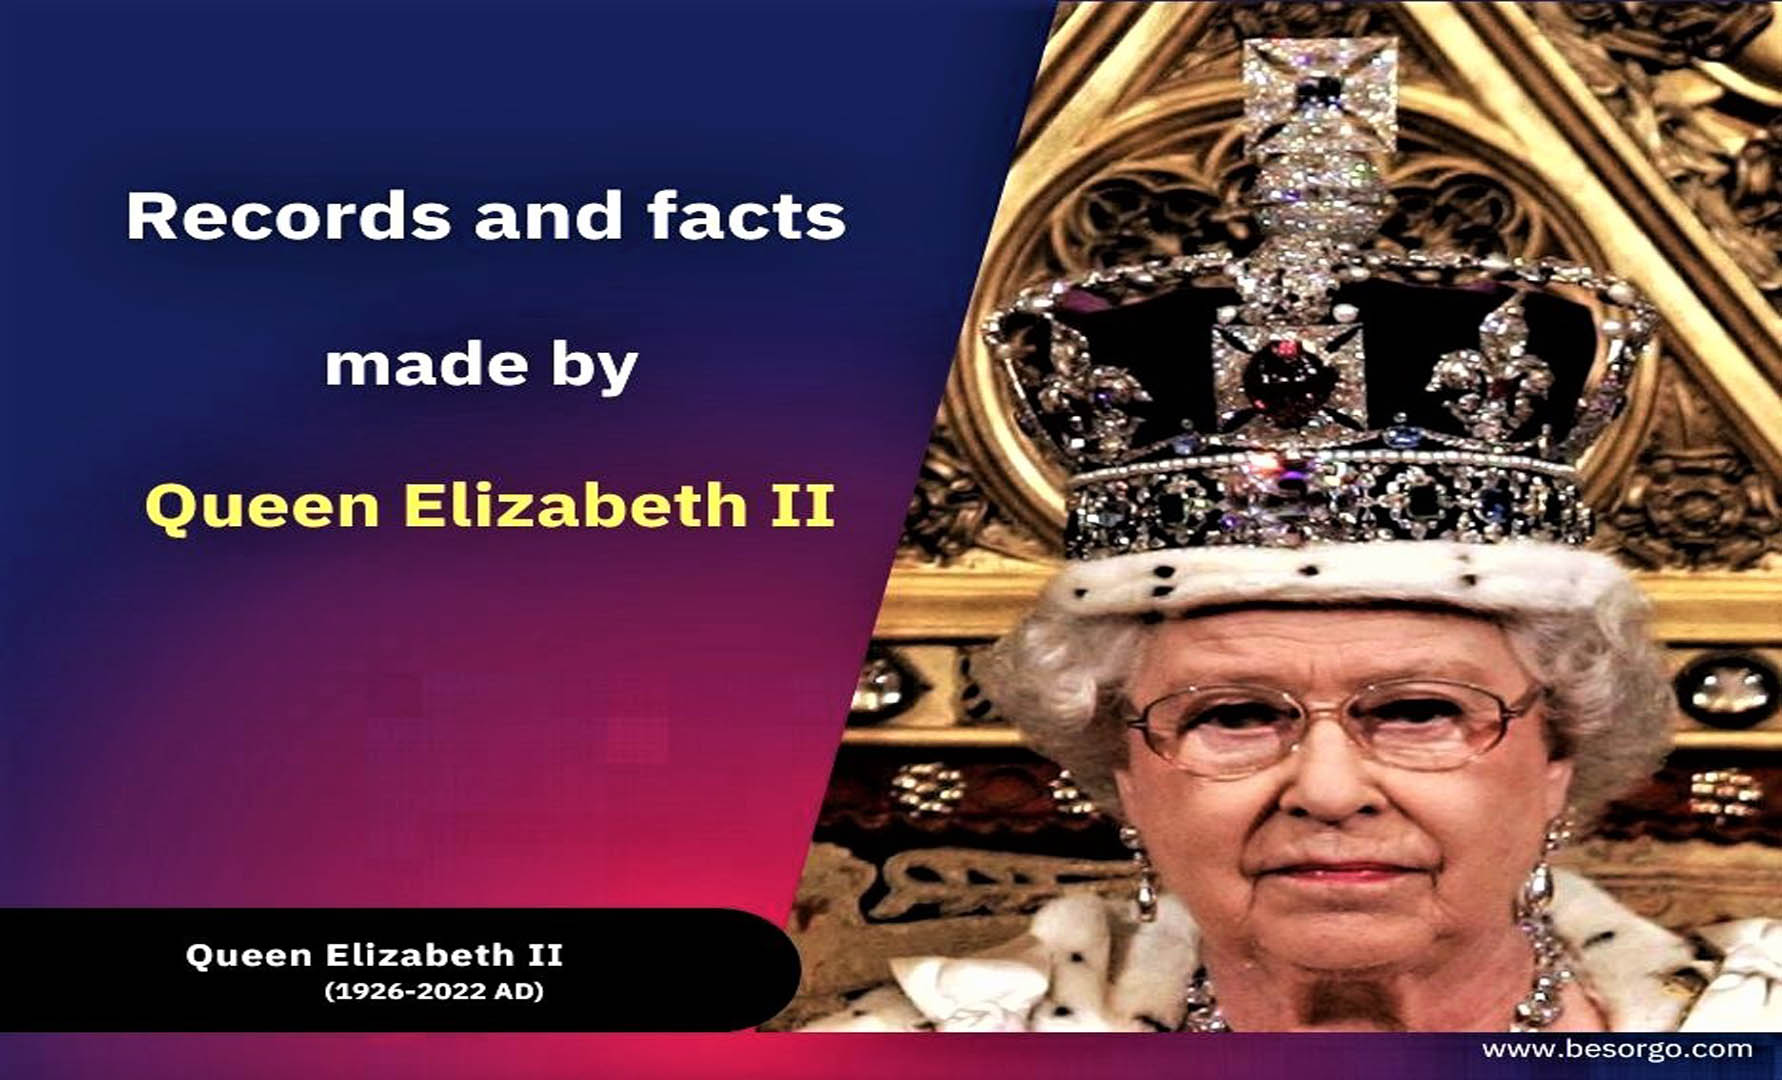 Records and facts made by Queen Elizabeth II